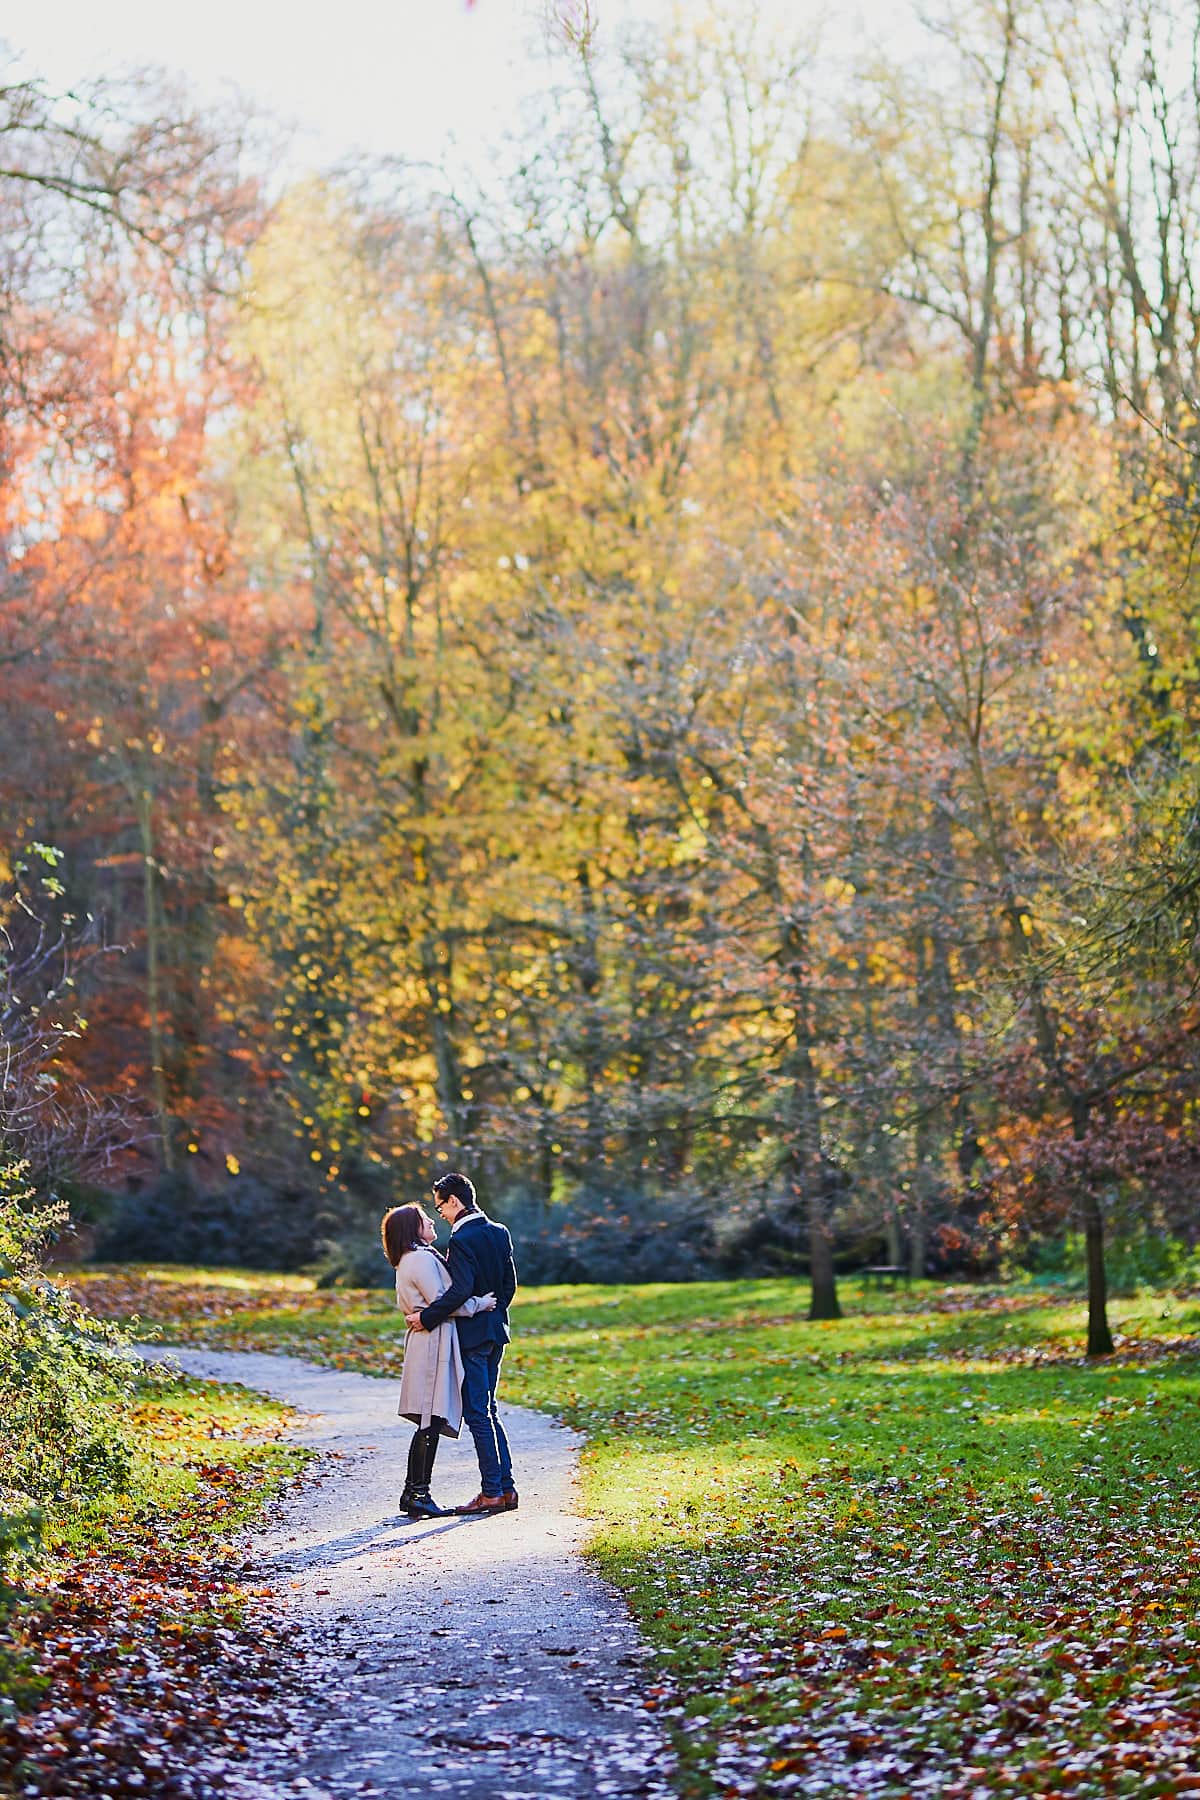 A winter woodland photoshoot sees a couple embrace in front of the colour of changing leaves